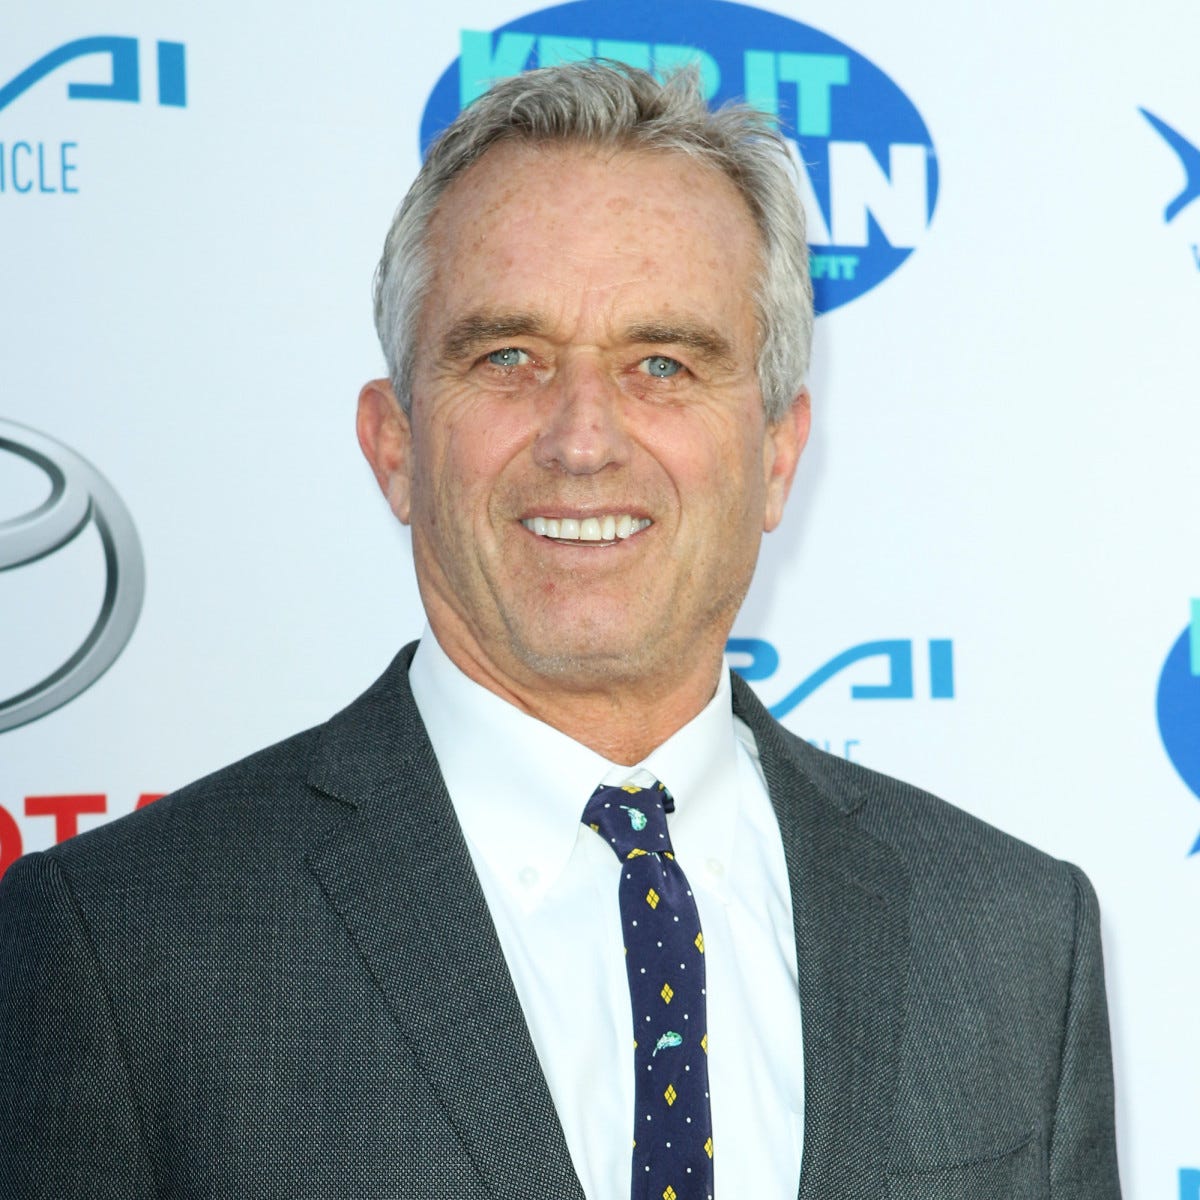 Robert F. Kennedy Jr. - Family, Career & Facts - Biography